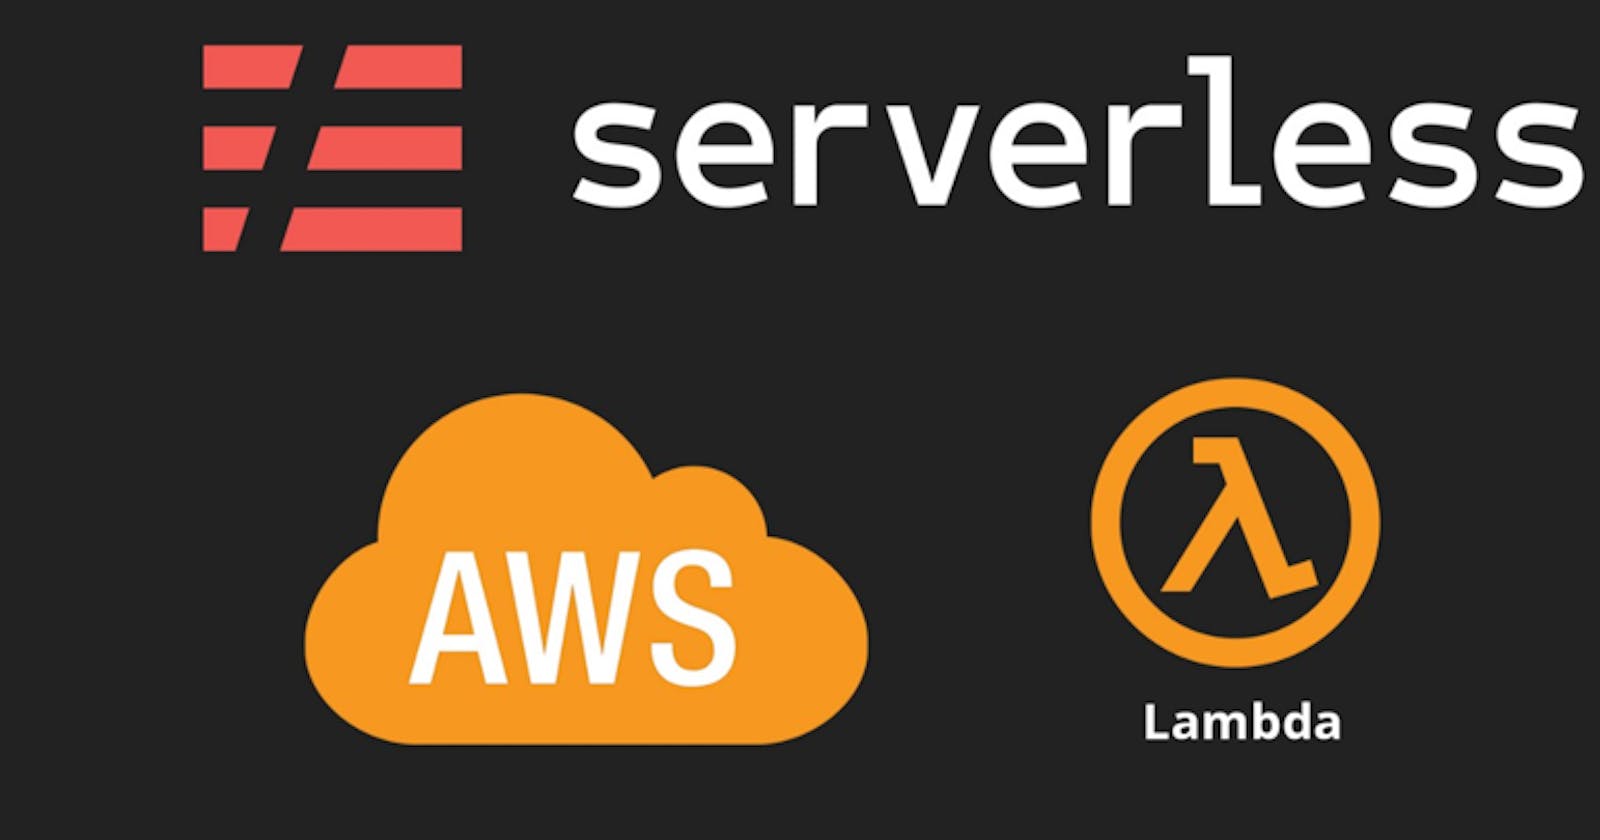 ServerlessArchitecture#07 - Leveraging Lambda Cache for Serverless Cost-Efficiency : An alternative to external caches such as Redis or Memcache